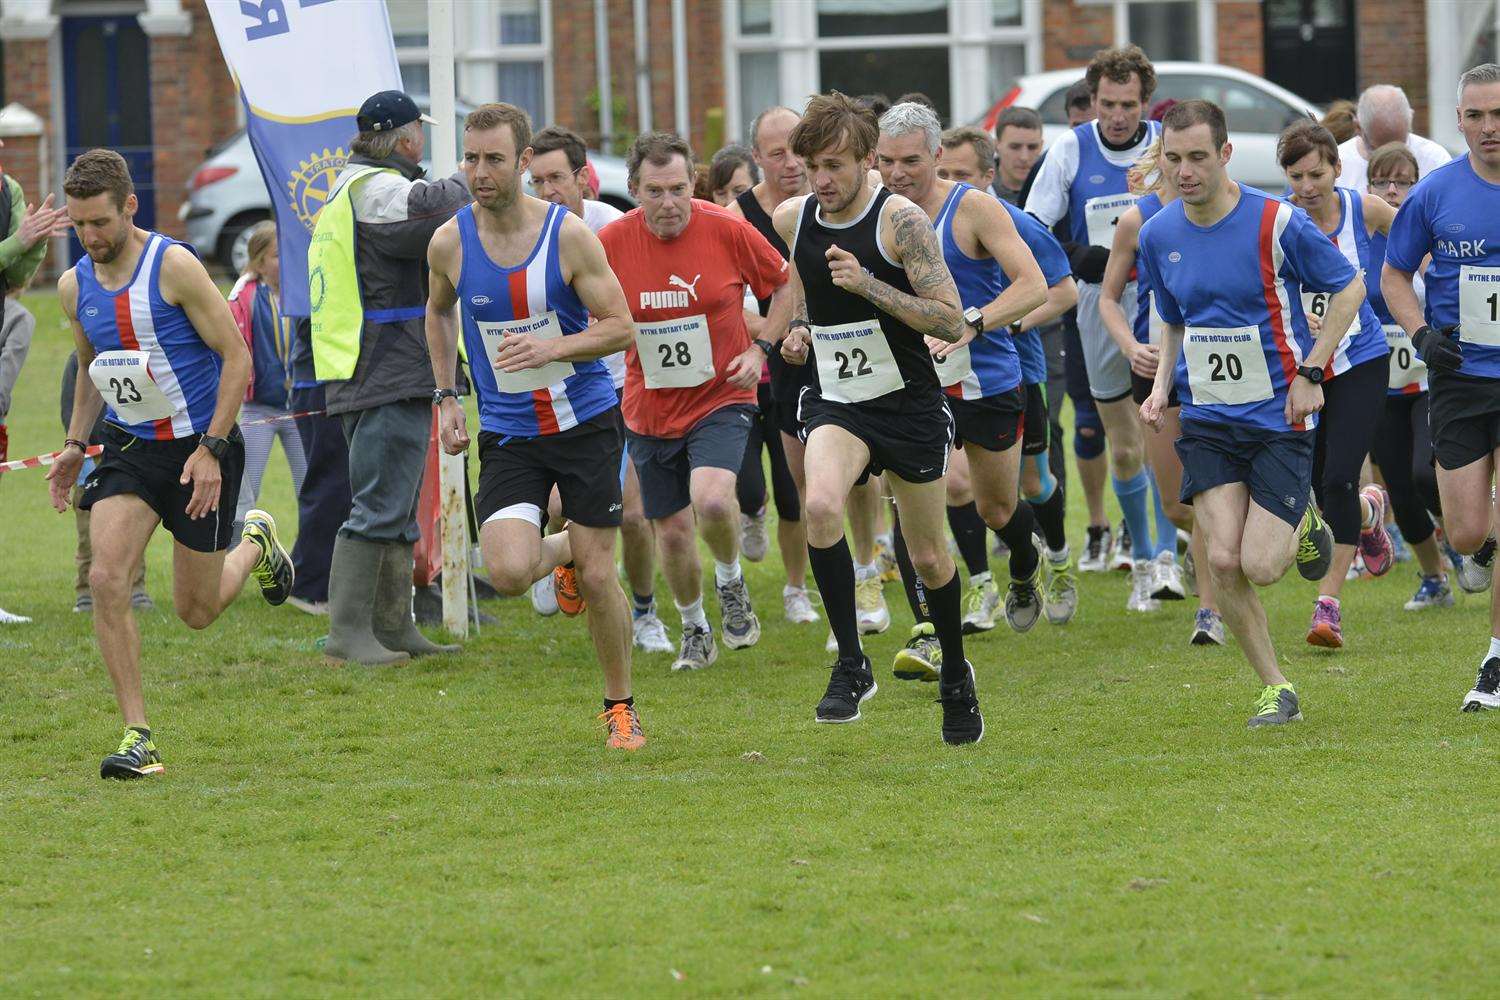 The over-16s race for Hythe Round the Houses, May 2014.